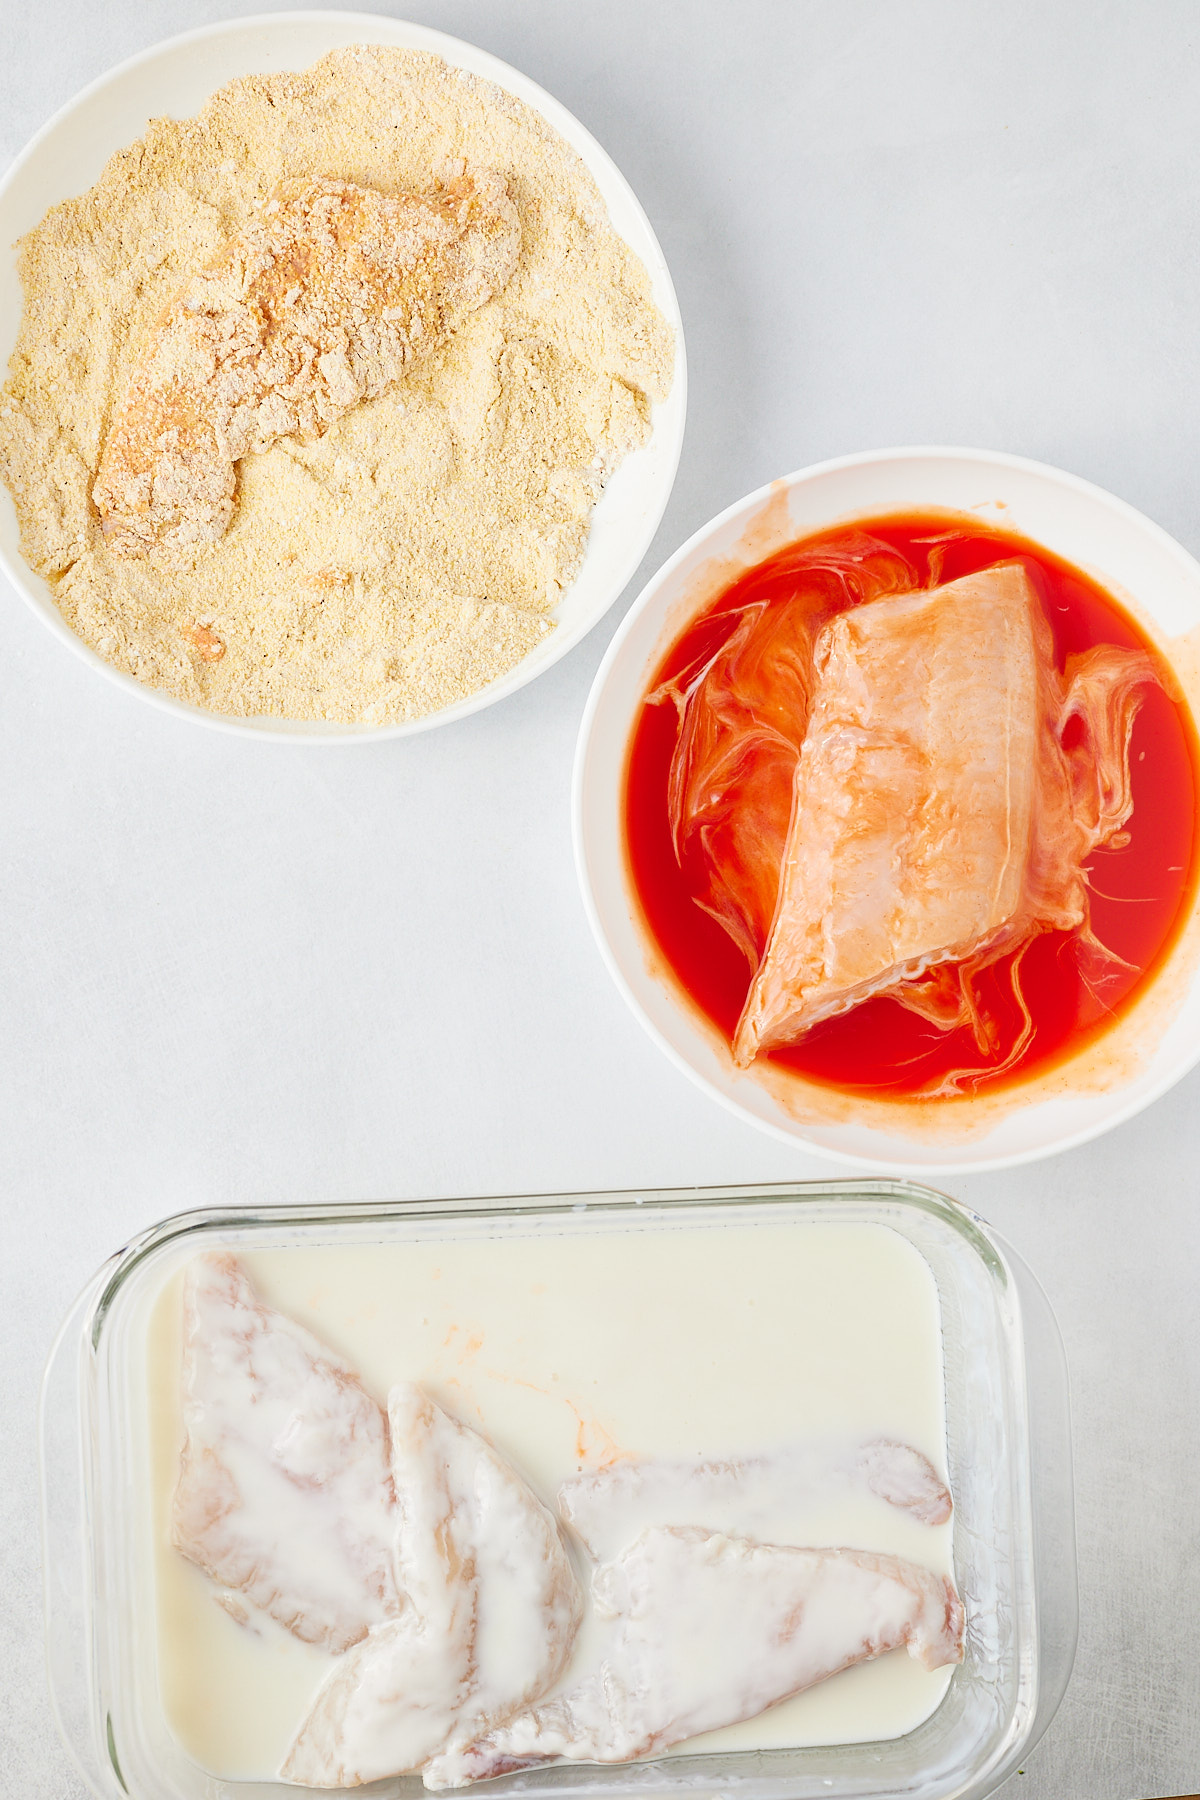 catfish dredging station with catfish filets in milk, hot sauce, and cornmeal mixture